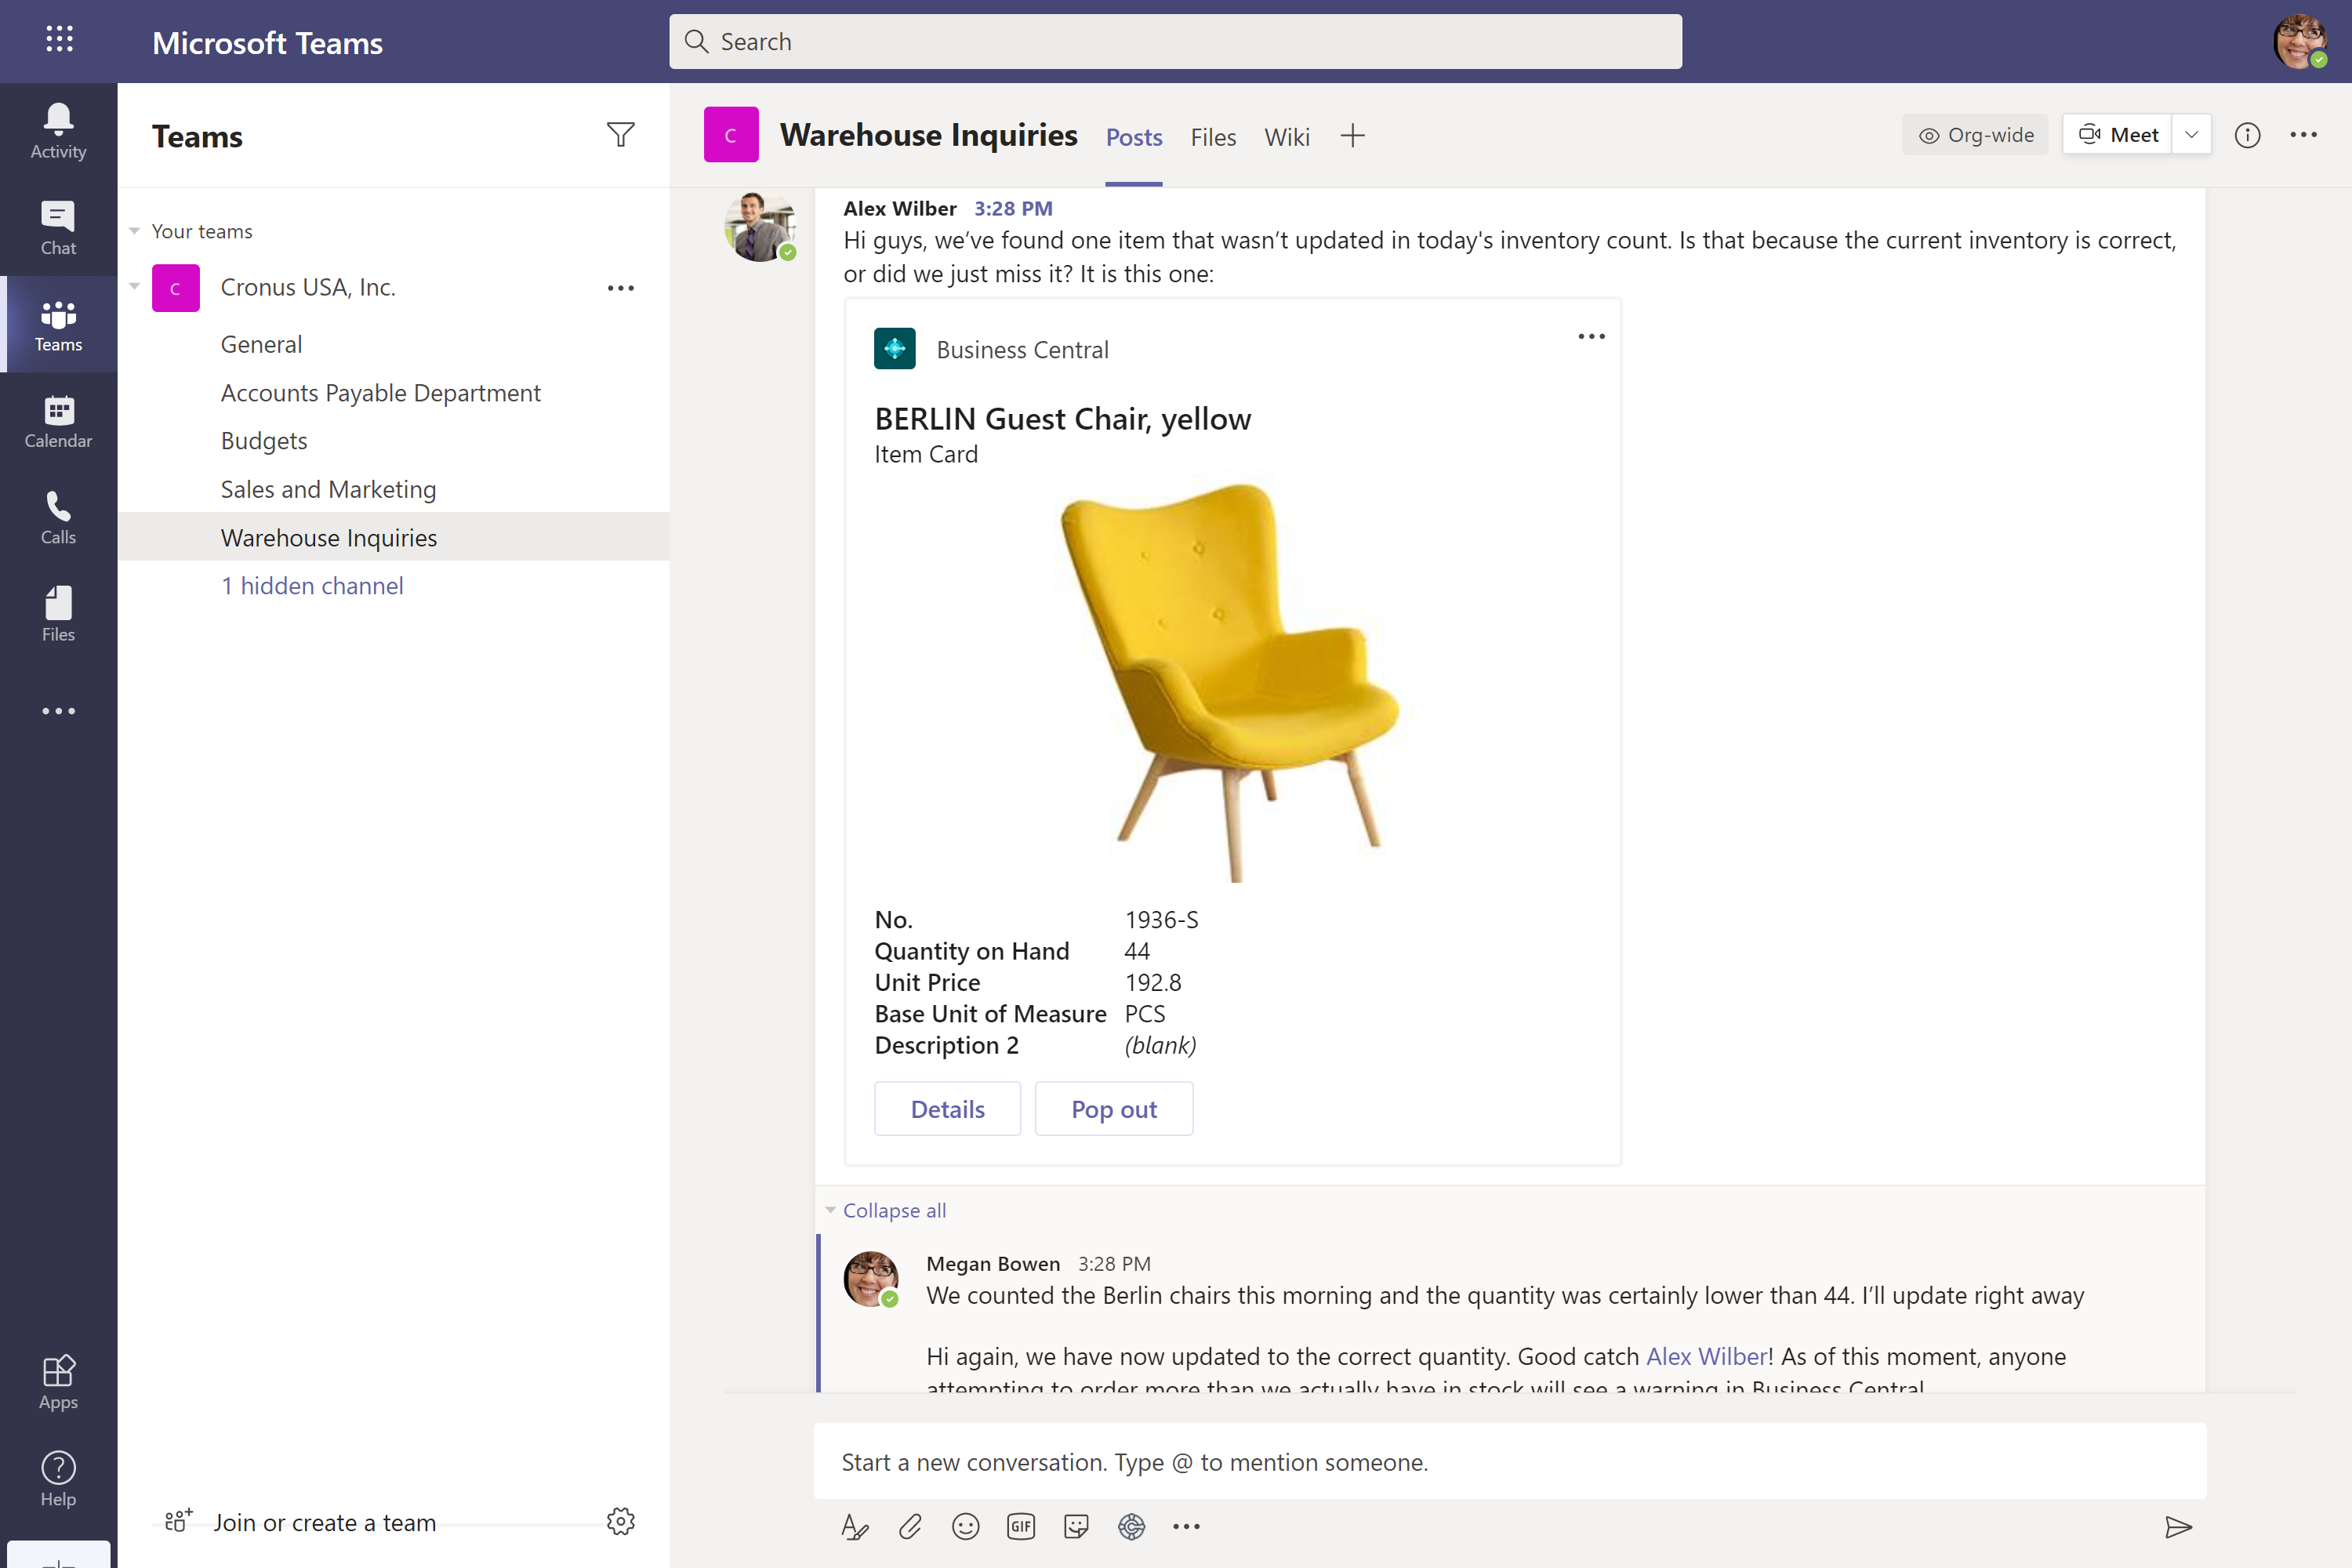 Conversation between coworkers in Microsoft Teams with business data as the topic of conversation